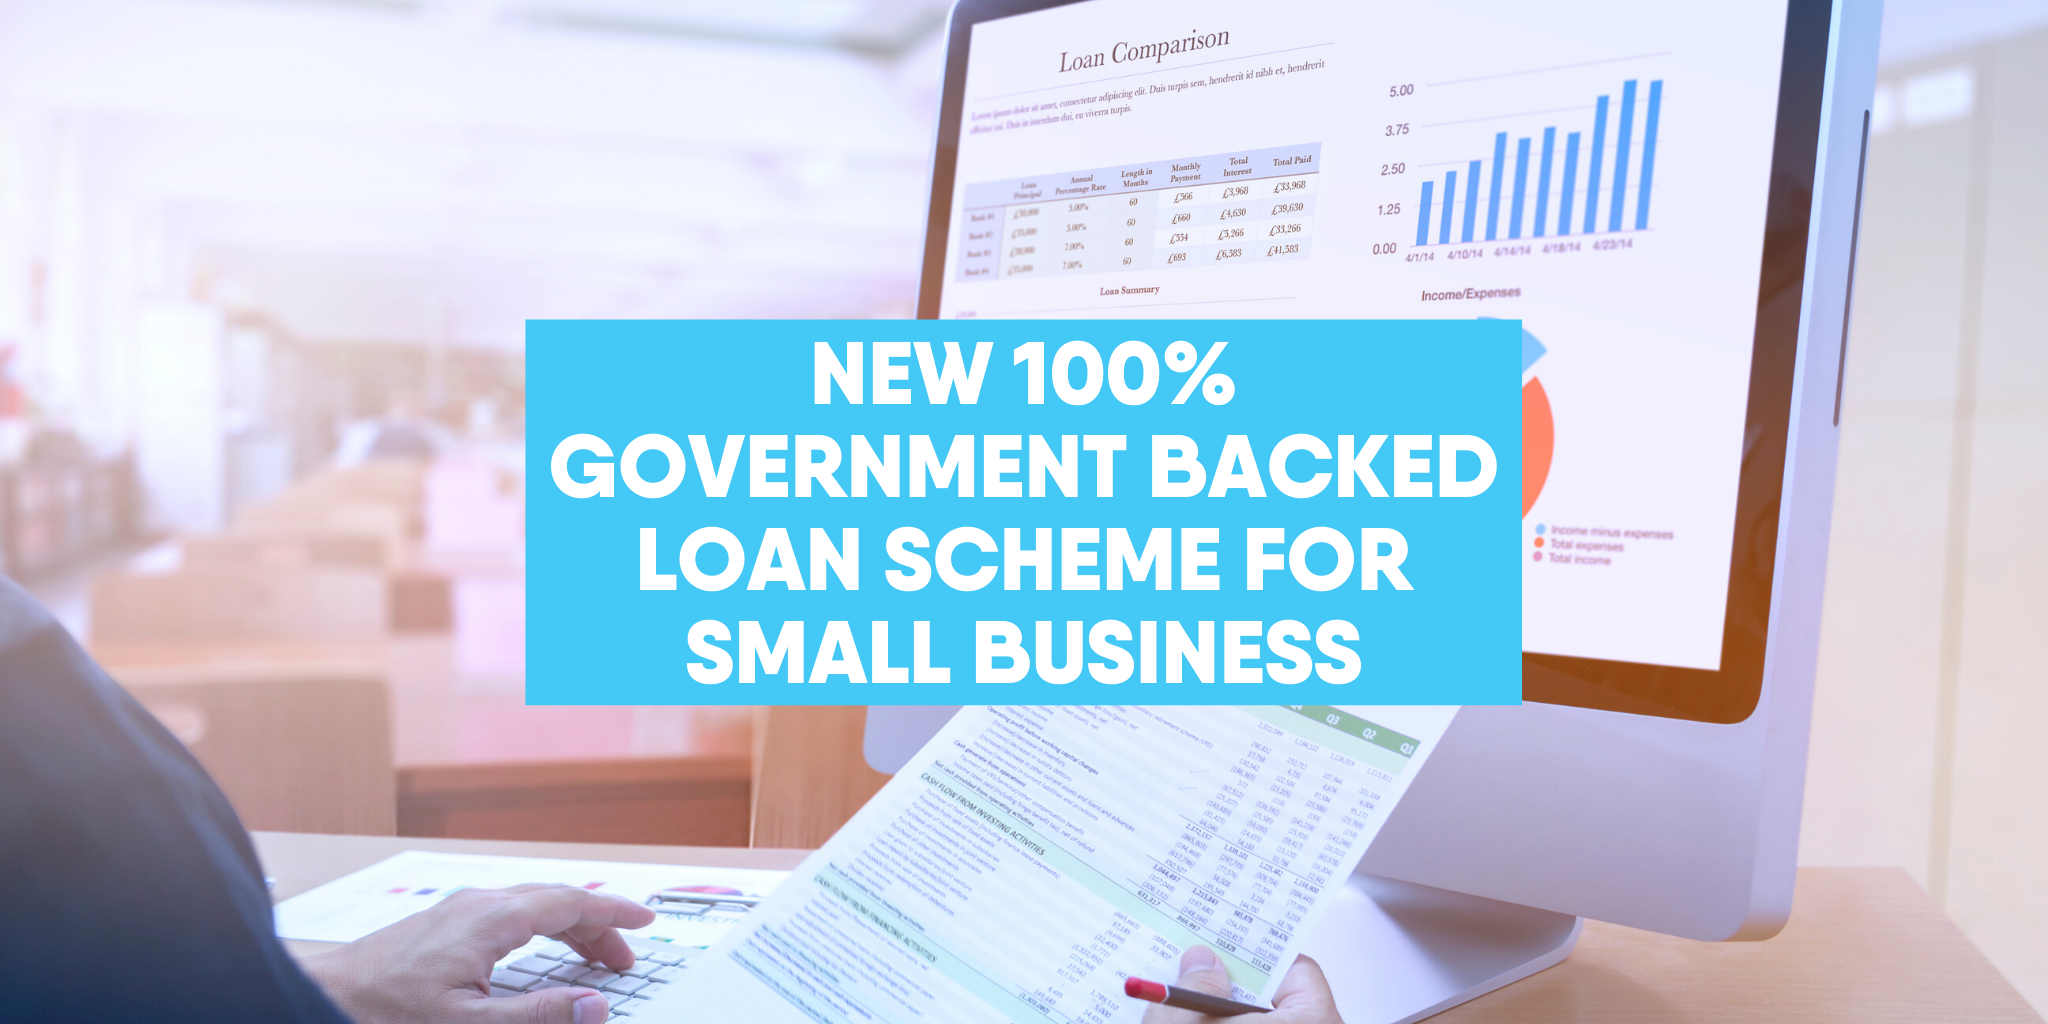 New 100% government-backed loan scheme for small business | Mark Eastwood